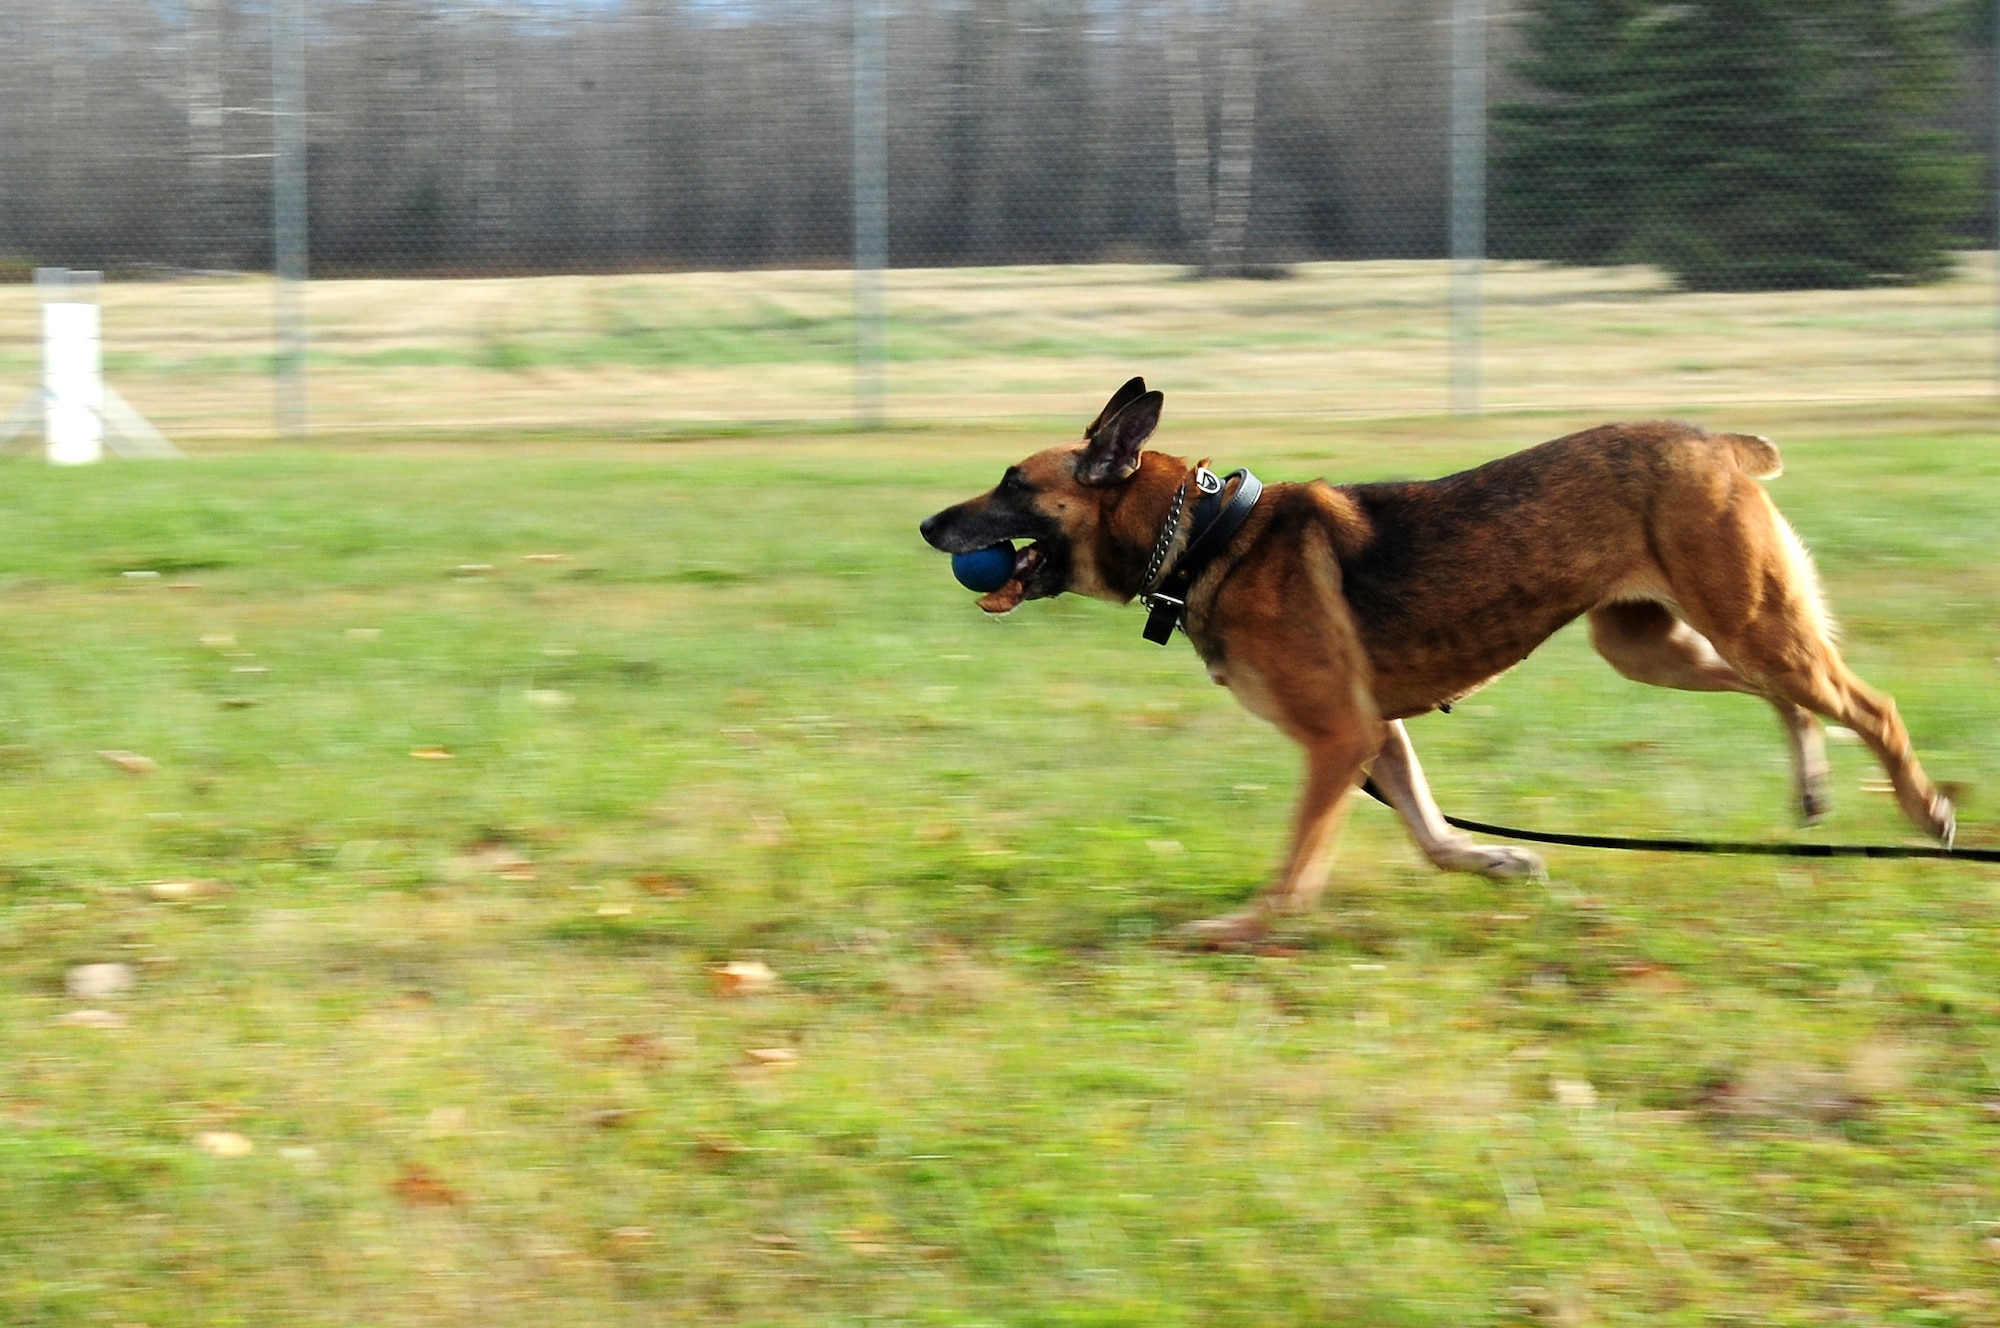 Azza, an 8-year-old Belgian Malinois military working dog, fetches a ball Oct. 4, 2012, Eielson Air Force Base, Alaska. Azza is assigned to the 354th Security Forces Squadron and recently returned from a deployment to Afghanistan. (U.S. Air Force photo/Airman 1st Class Zachary Perras)